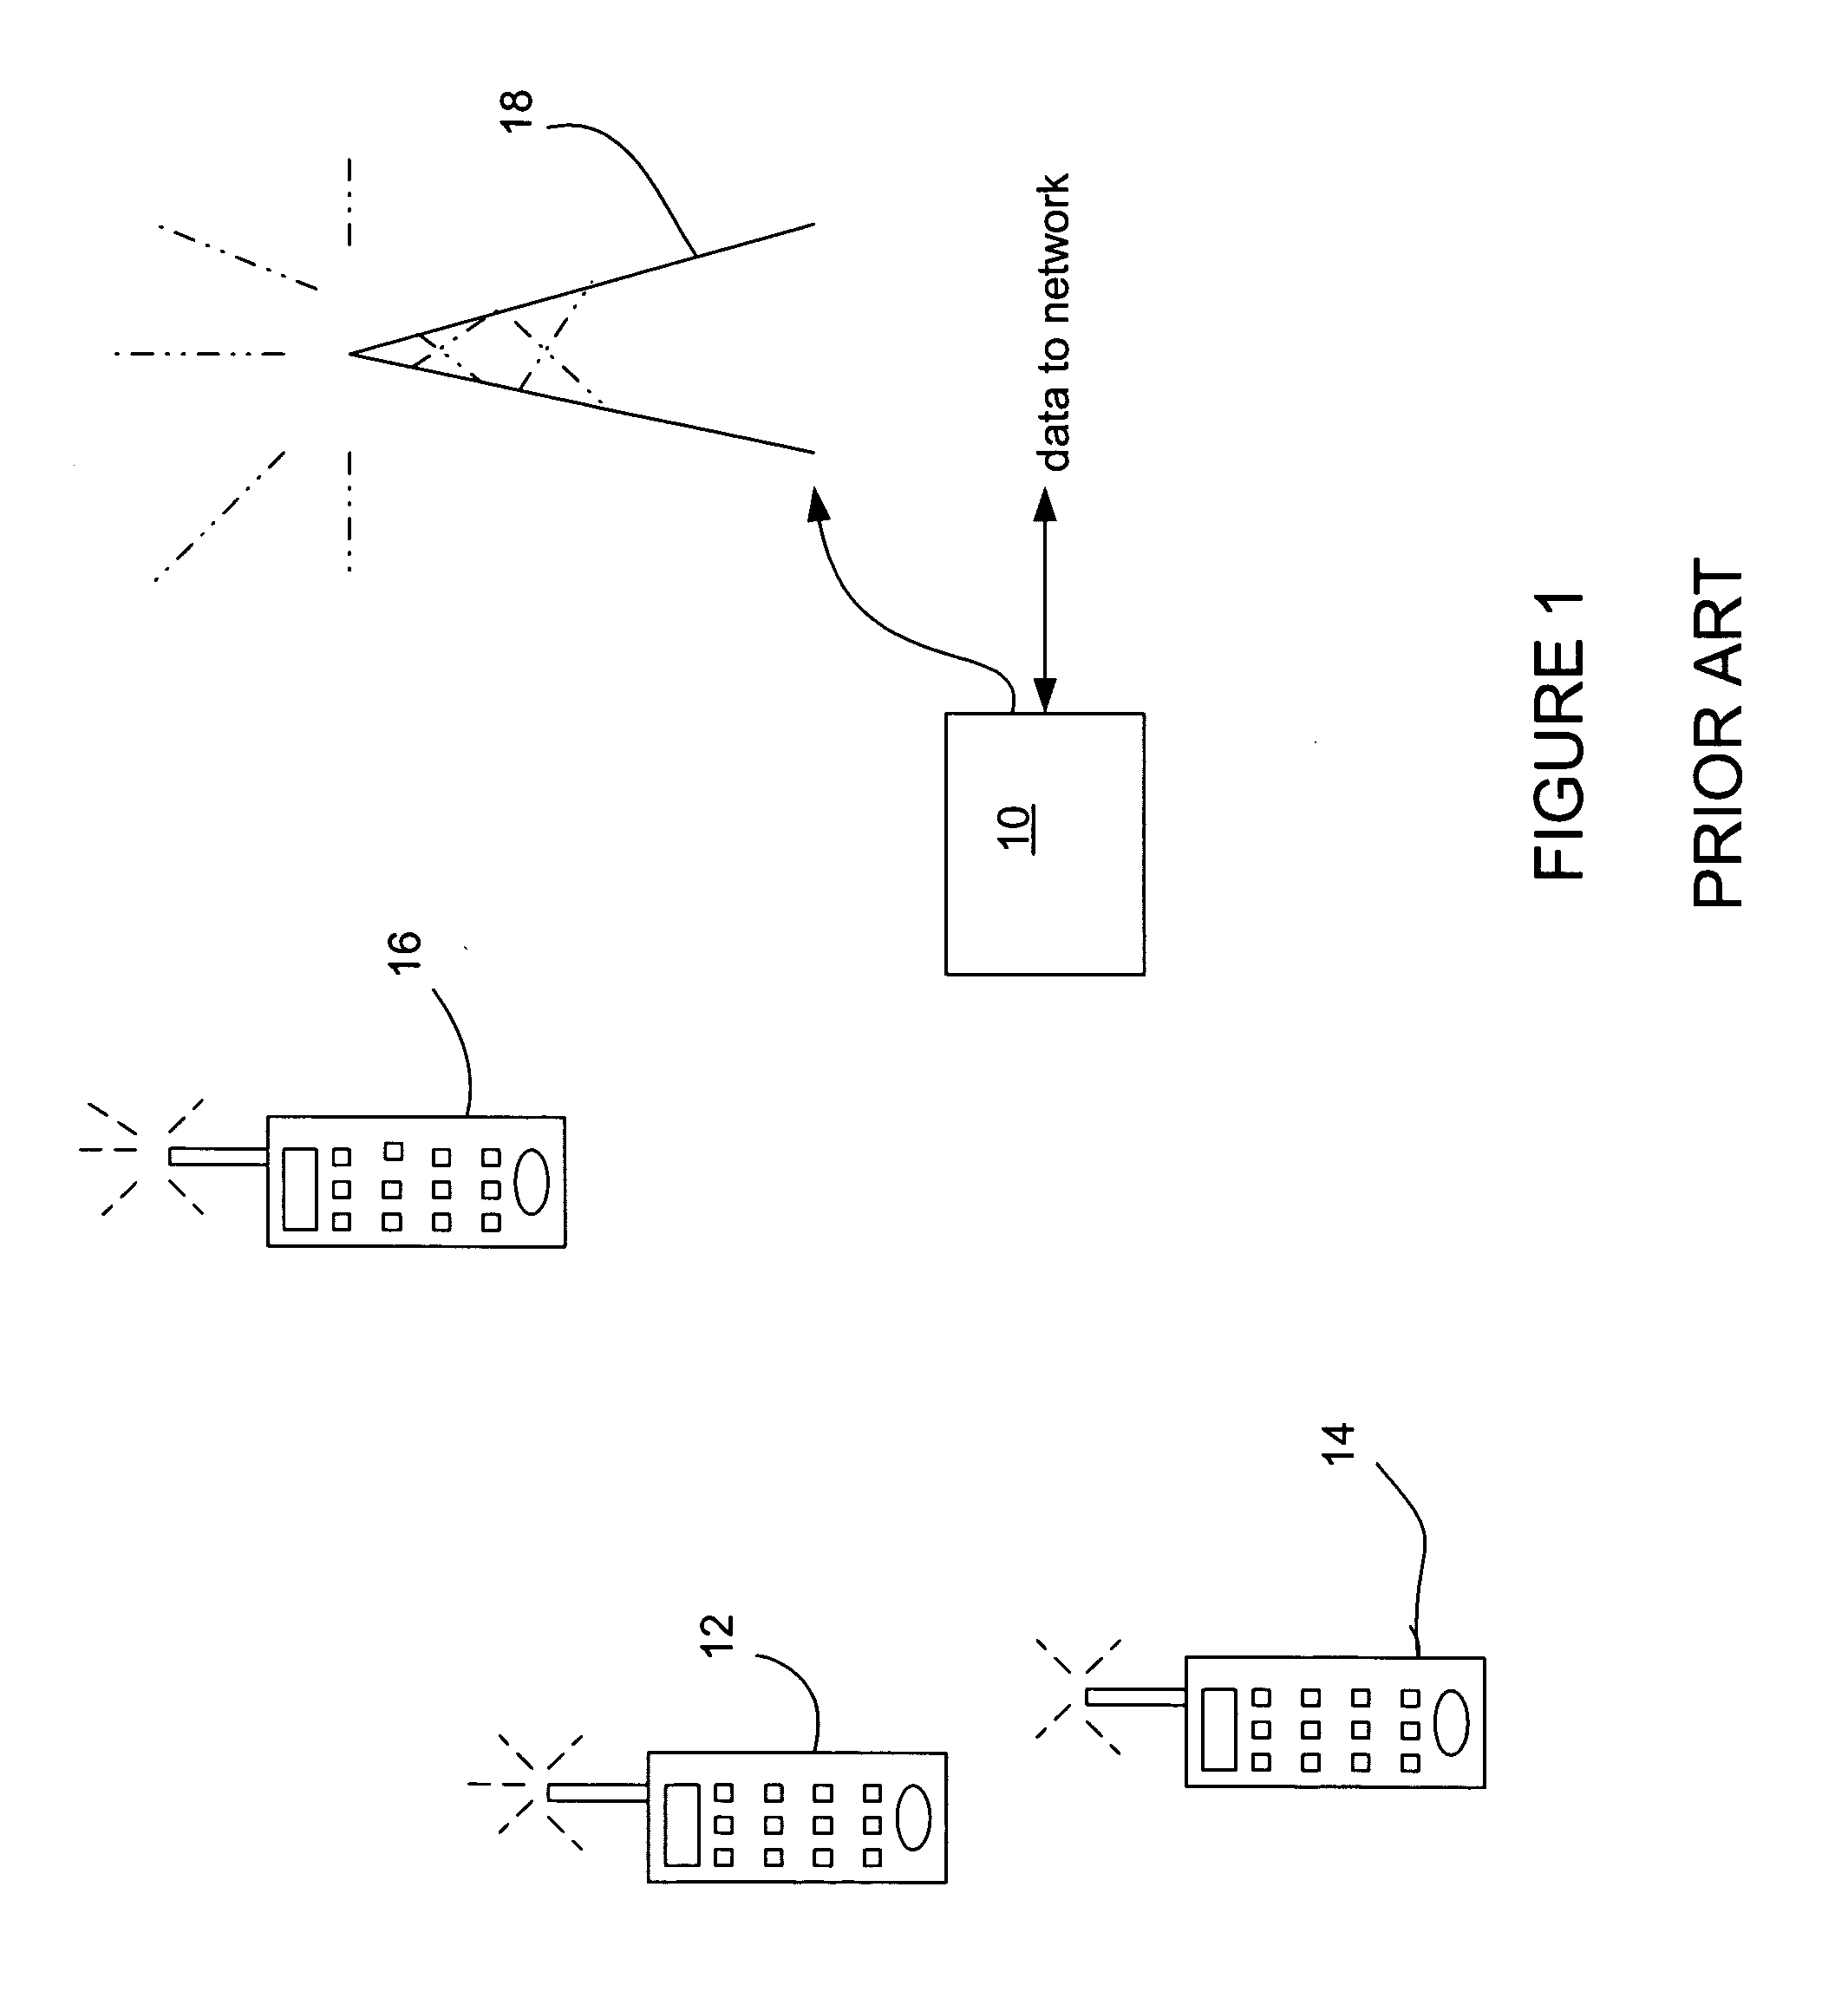 System and method for preprocessing a signal for transmission by a power amplifier